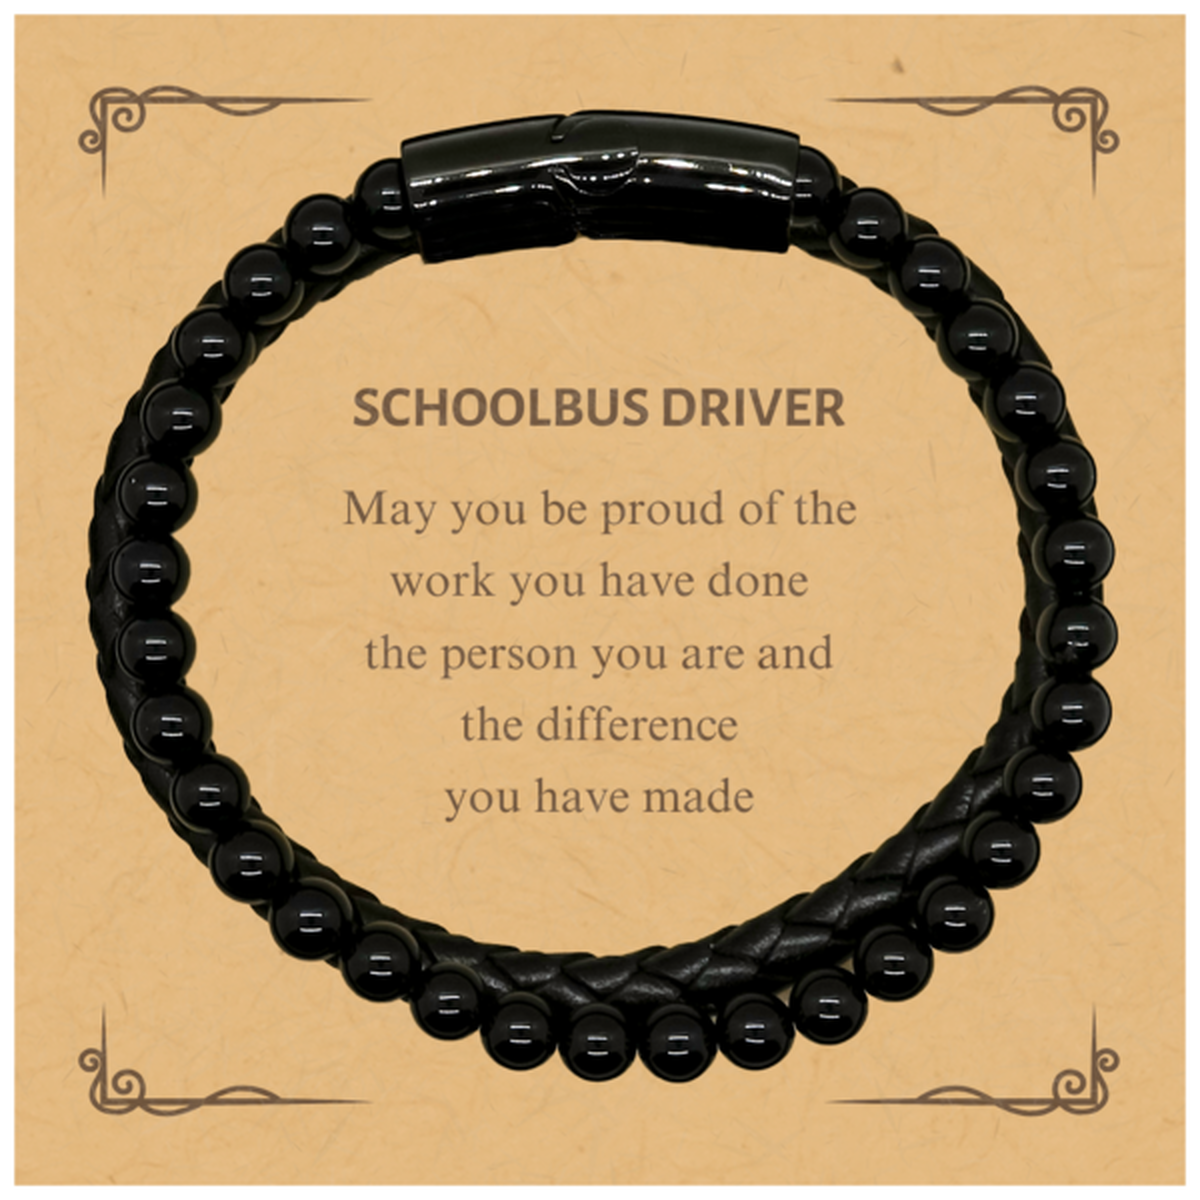 Schoolbus Driver May you be proud of the work you have done, Retirement Schoolbus Driver Stone Leather Bracelets for Colleague Appreciation Gifts Amazing for Schoolbus Driver